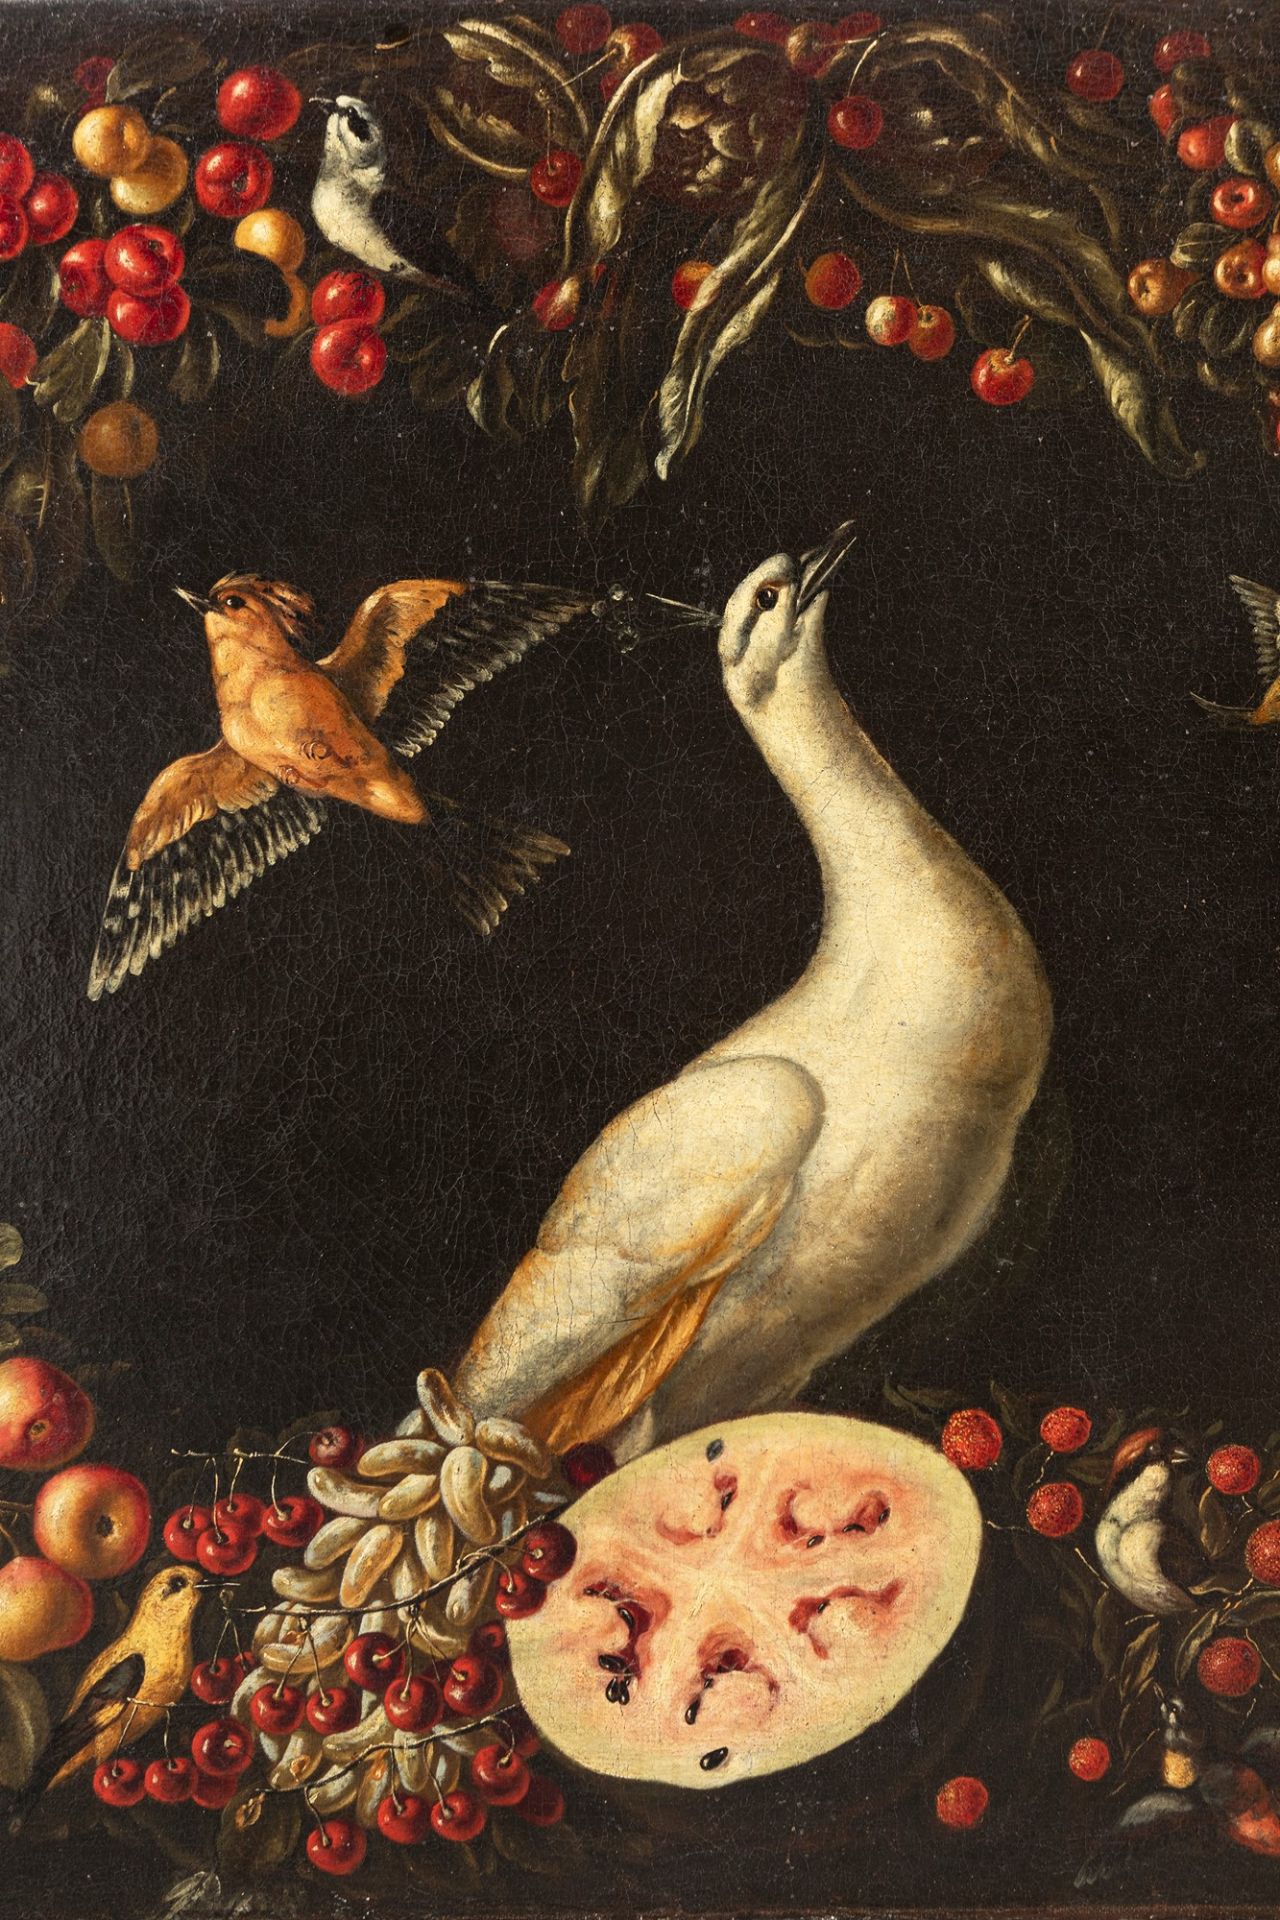 Neapolitan school, XVII century - Garland of fruit and vegetables with white peacock and other birds - Image 6 of 7